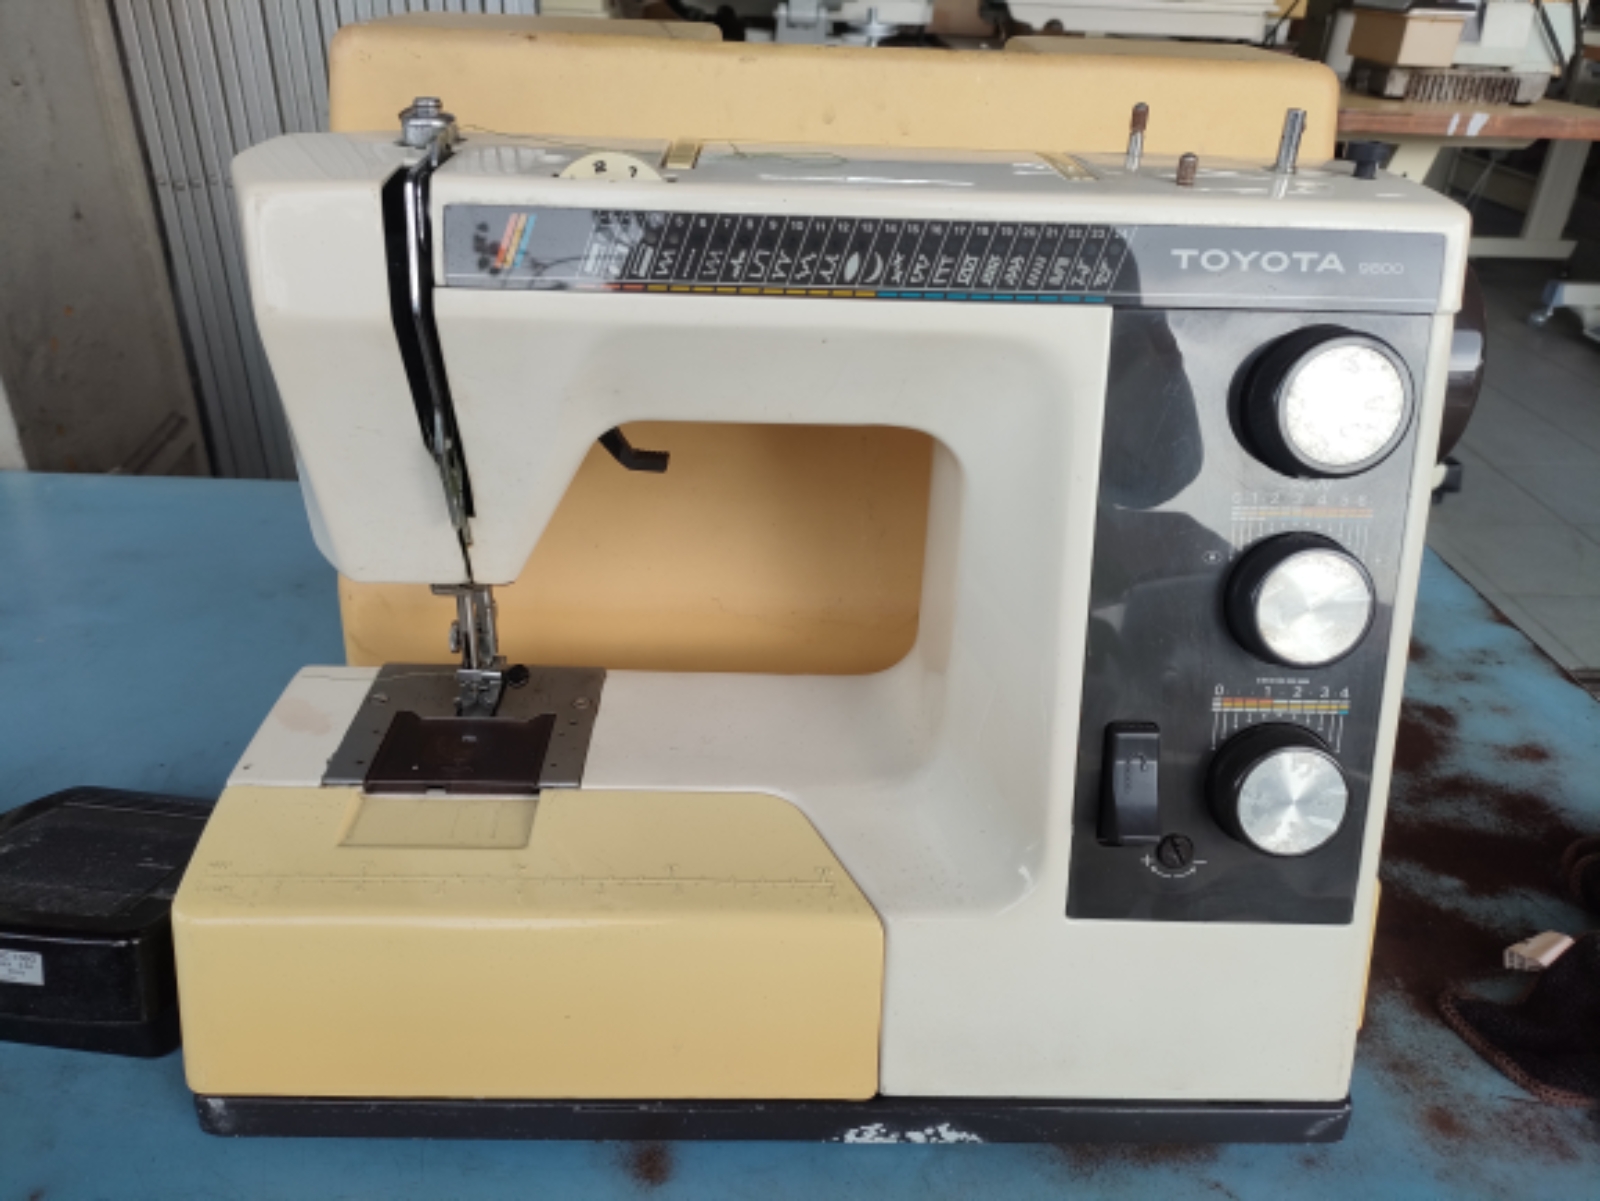 SECOND HAND TOYOTA PORTABLE SEWING MACHINE